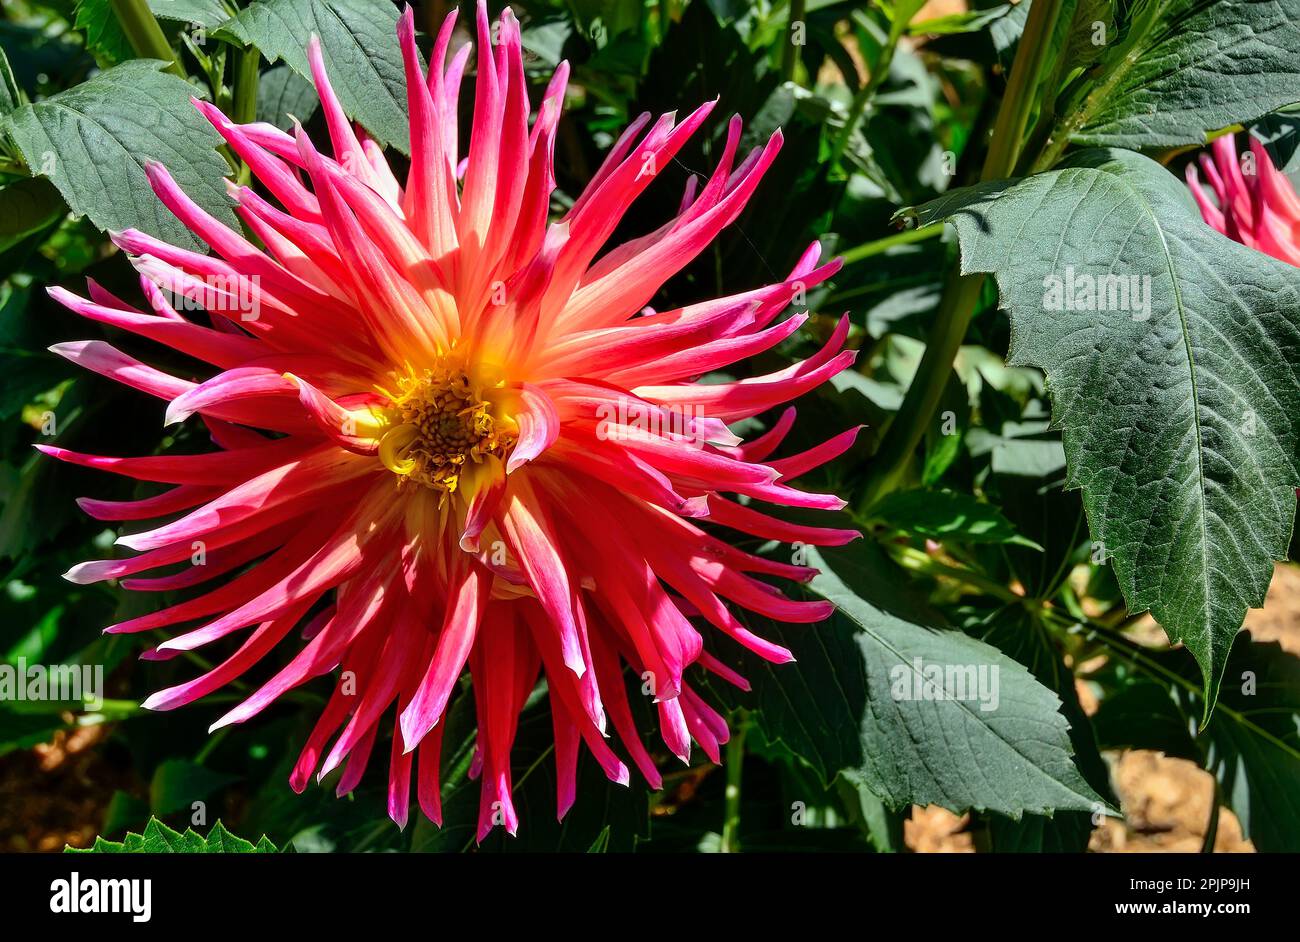 Dahlia cactus variety Fringed Star in the garden. One of the most unpretentious varieties. Single flower with salmon colored petals and yellow center, Stock Photo